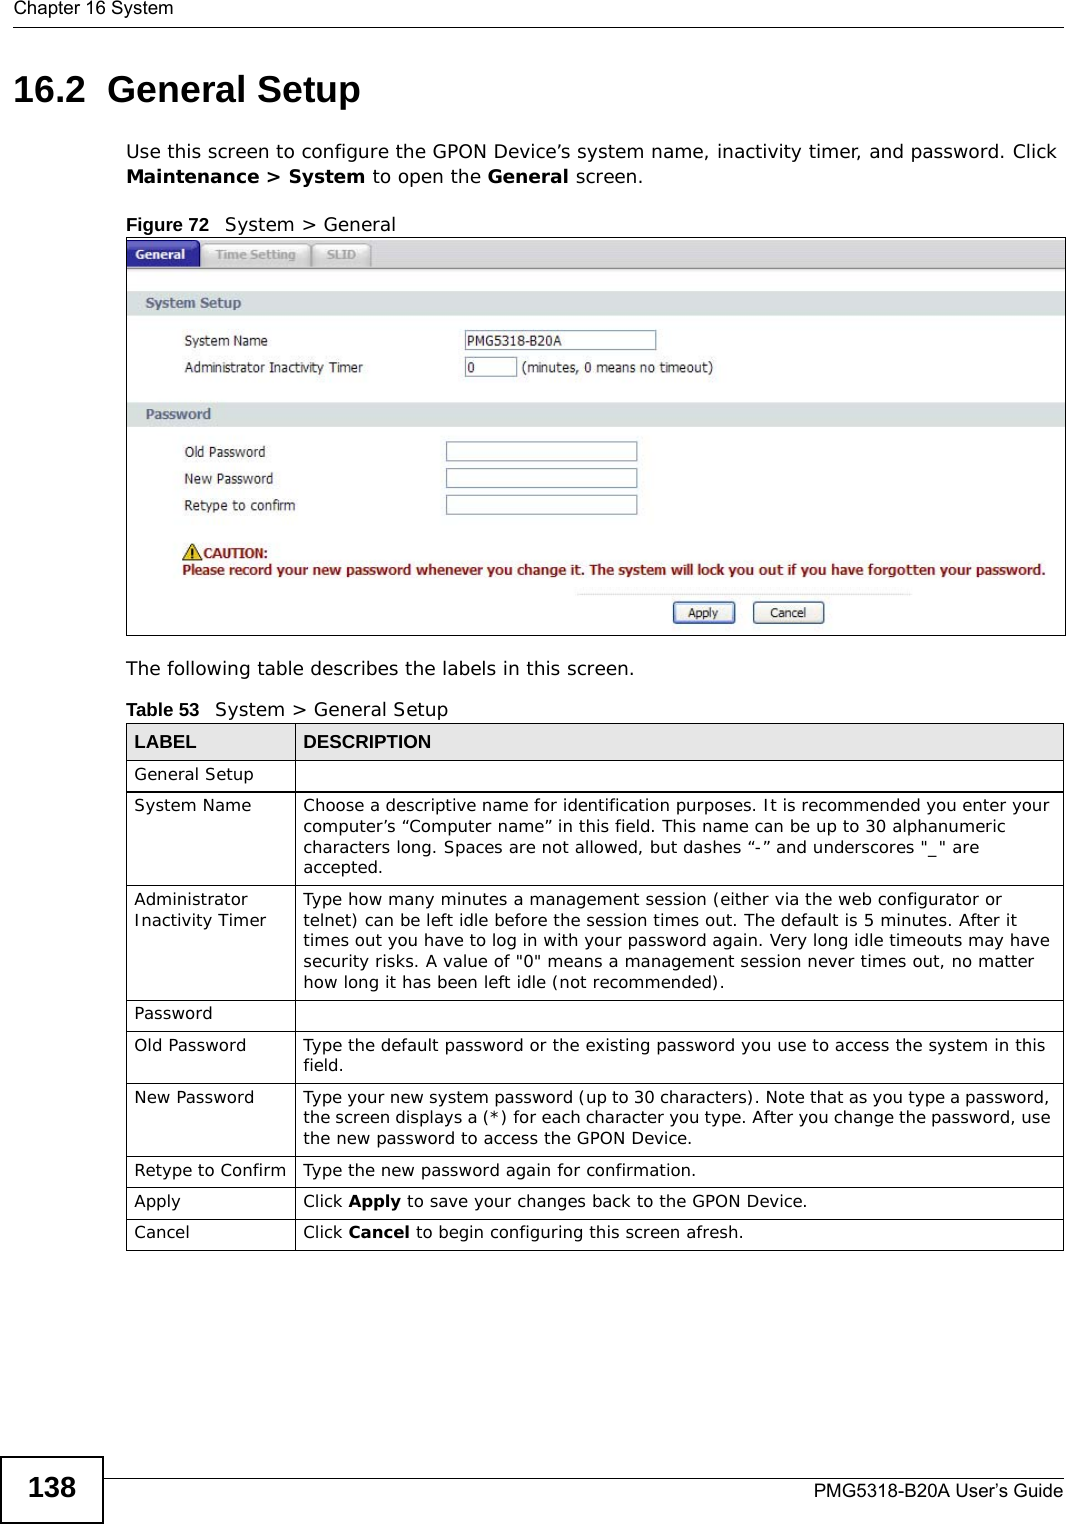 Chapter 16 SystemPMG5318-B20A User’s Guide13816.2  General Setup  Use this screen to configure the GPON Device’s system name, inactivity timer, and password. Click Maintenance &gt; System to open the General screen. Figure 72   System &gt; GeneralThe following table describes the labels in this screen.  Table 53   System &gt; General SetupLABEL DESCRIPTIONGeneral SetupSystem Name Choose a descriptive name for identification purposes. It is recommended you enter your computer’s “Computer name” in this field. This name can be up to 30 alphanumeric characters long. Spaces are not allowed, but dashes “-” and underscores &quot;_&quot; are accepted.Administrator Inactivity Timer Type how many minutes a management session (either via the web configurator or telnet) can be left idle before the session times out. The default is 5 minutes. After it times out you have to log in with your password again. Very long idle timeouts may have security risks. A value of &quot;0&quot; means a management session never times out, no matter how long it has been left idle (not recommended).PasswordOld Password Type the default password or the existing password you use to access the system in this field.New Password Type your new system password (up to 30 characters). Note that as you type a password, the screen displays a (*) for each character you type. After you change the password, use the new password to access the GPON Device.Retype to Confirm Type the new password again for confirmation.Apply Click Apply to save your changes back to the GPON Device.Cancel Click Cancel to begin configuring this screen afresh.